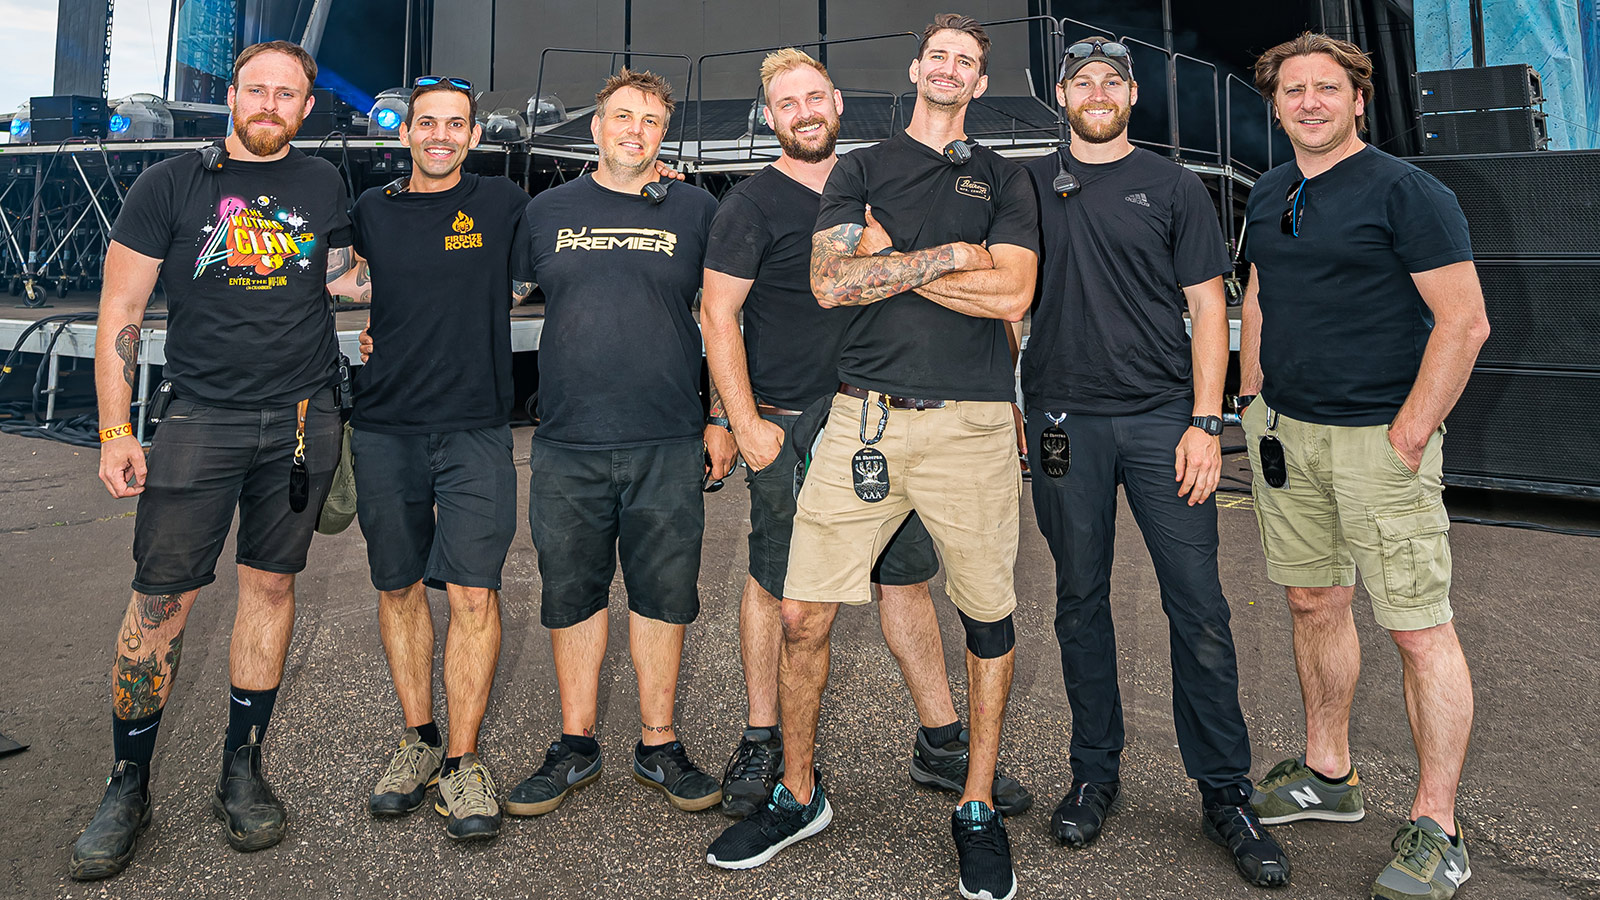 (L to R) Colin Dodds, PA Tech; Charlie Albin, Audio Systems Engineer; David Poynter, PA Tech; Dave White, Chewie Tech; Adam Wells, PA Tech; Parker Vandenberg, PA Tech; Chris Marsh, Production Manager & FOH Engineer